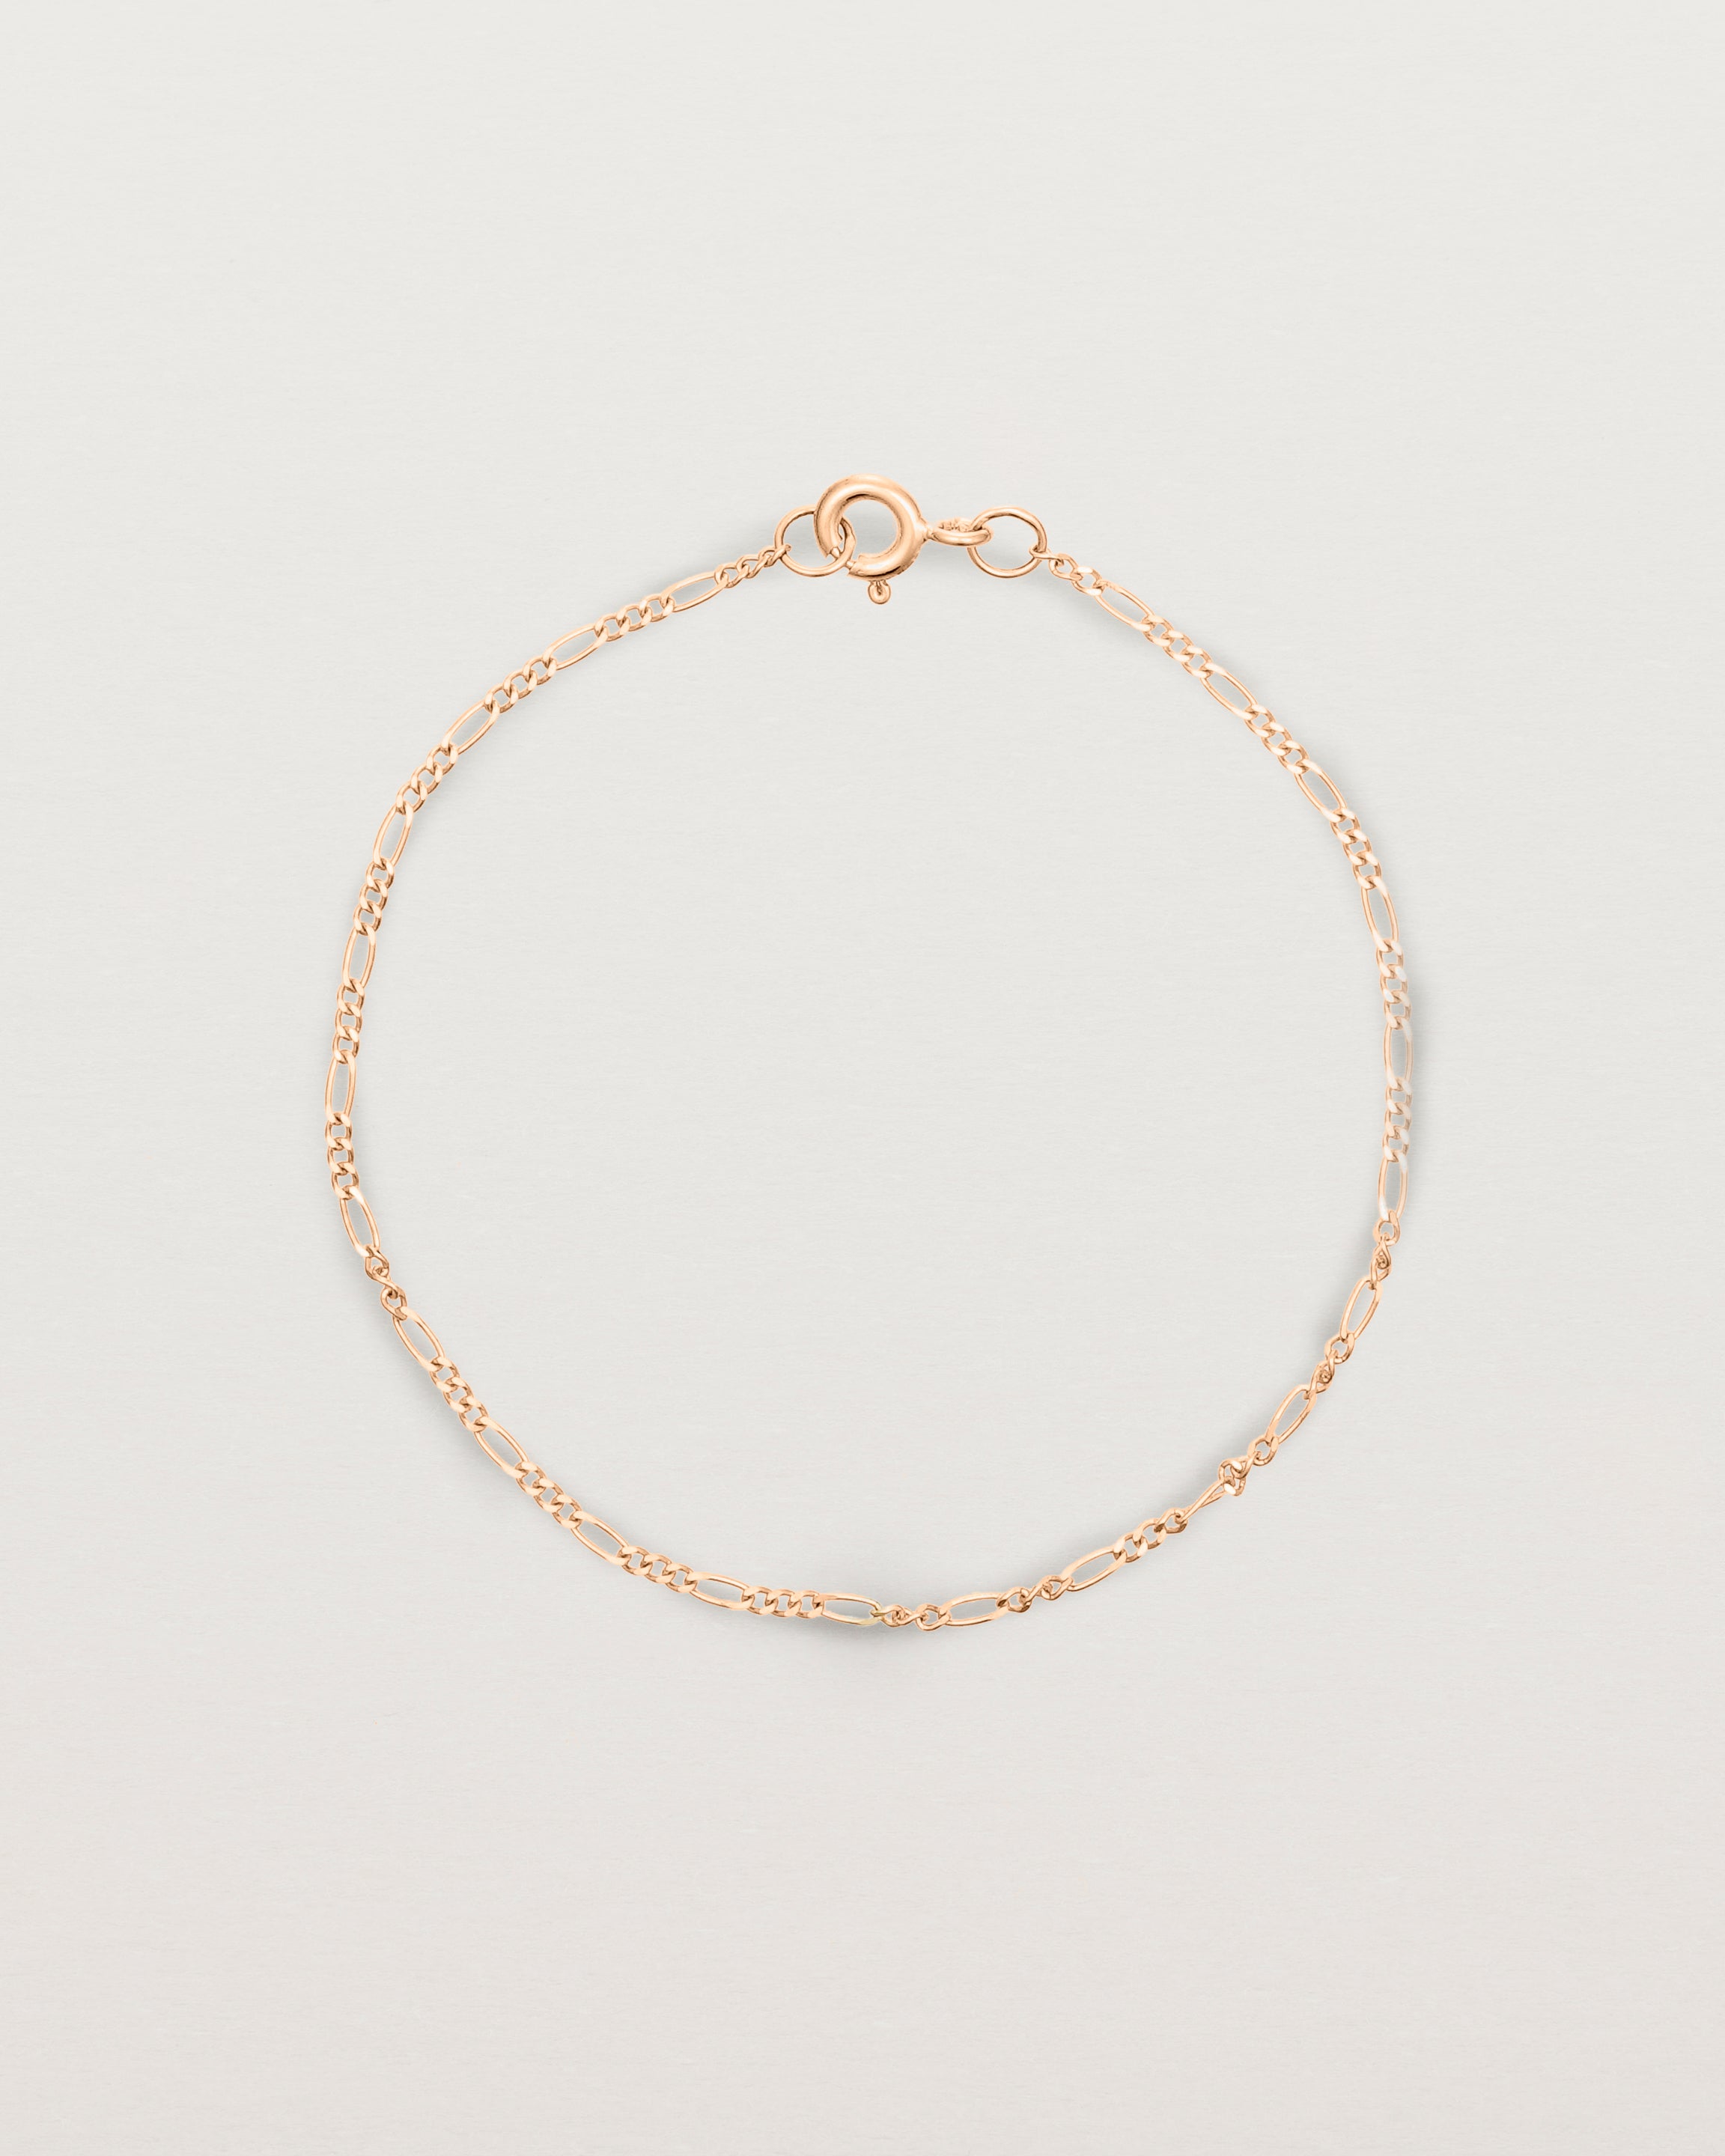 Our signature figaro chain in rose gold